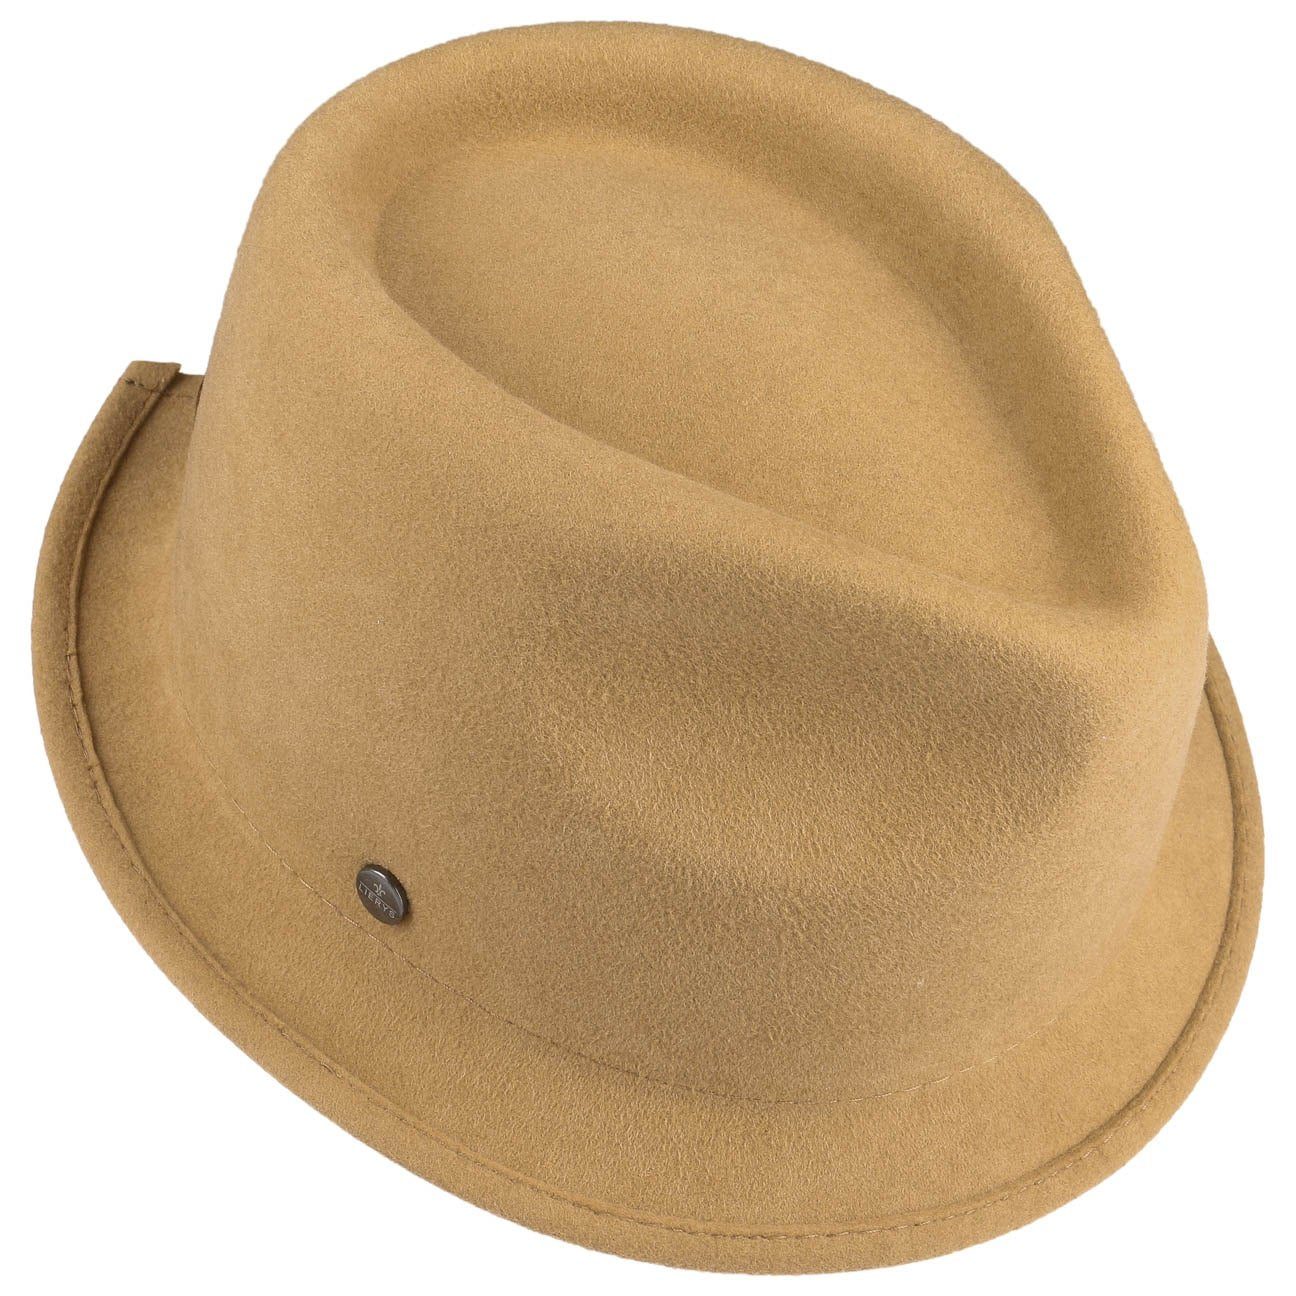 Lierys in (1-St) Made Wollhut, the Trilby EU